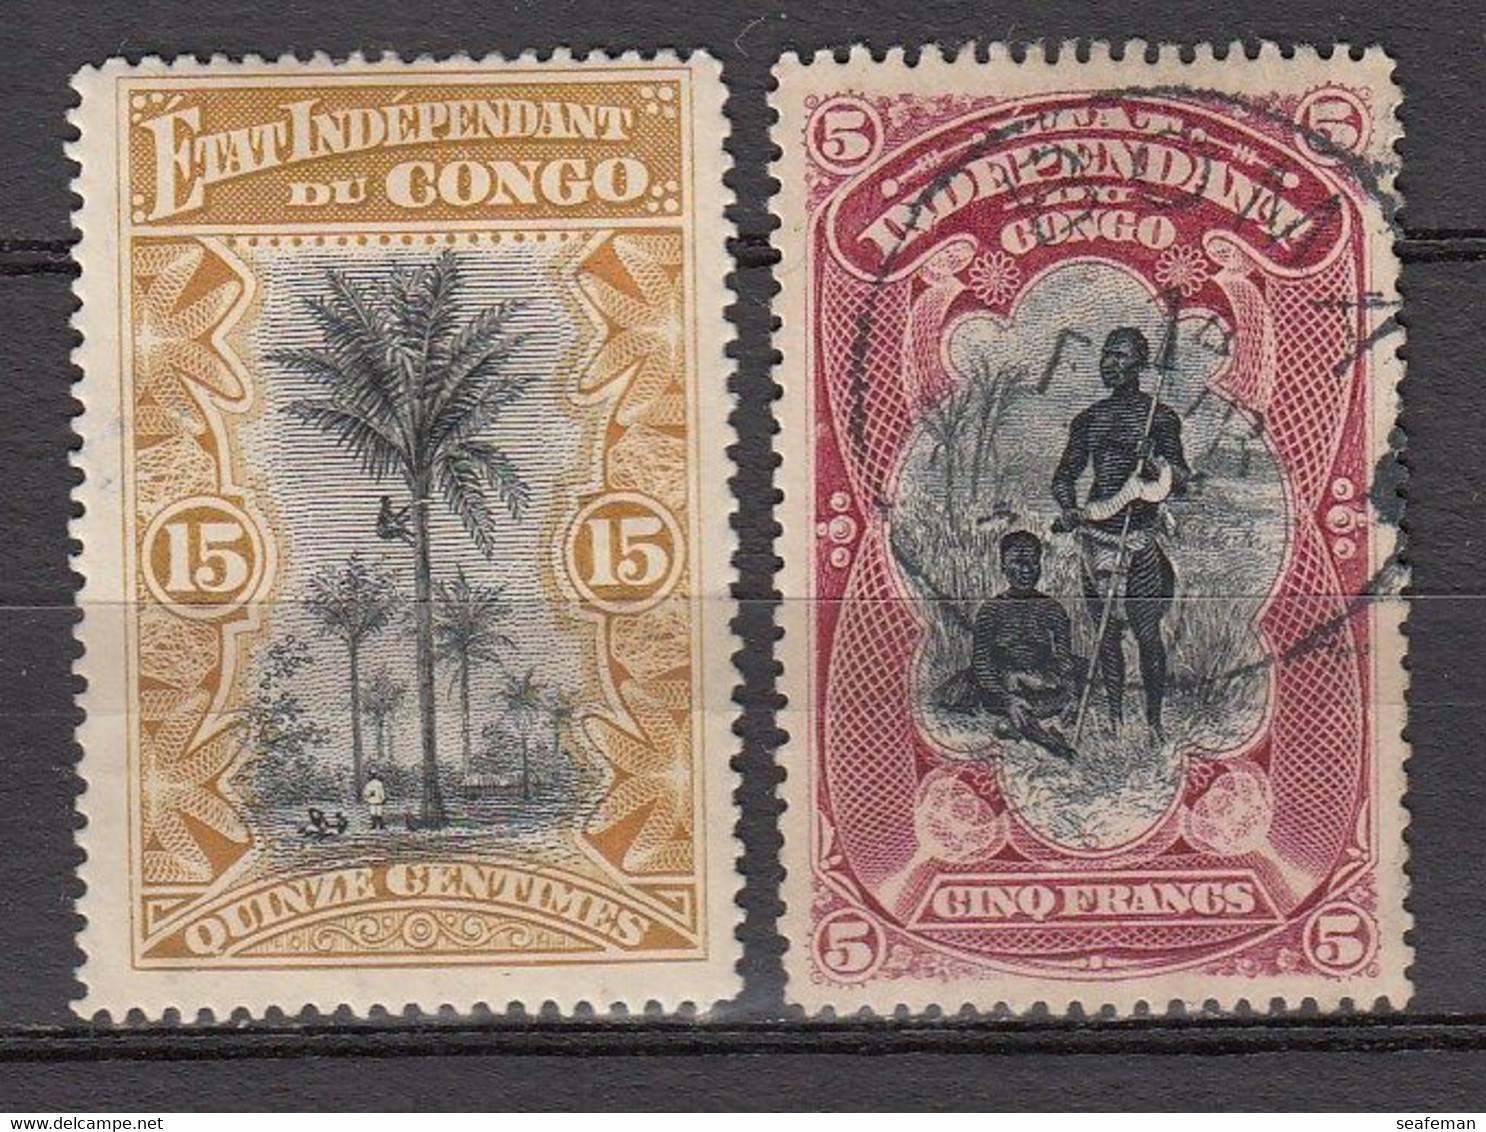 BELGIE-CONGO-many Postmark + Set Michel 14-25,27-29 [cw 275,00],see 96 Scans [81BC] - Collections (with Albums)